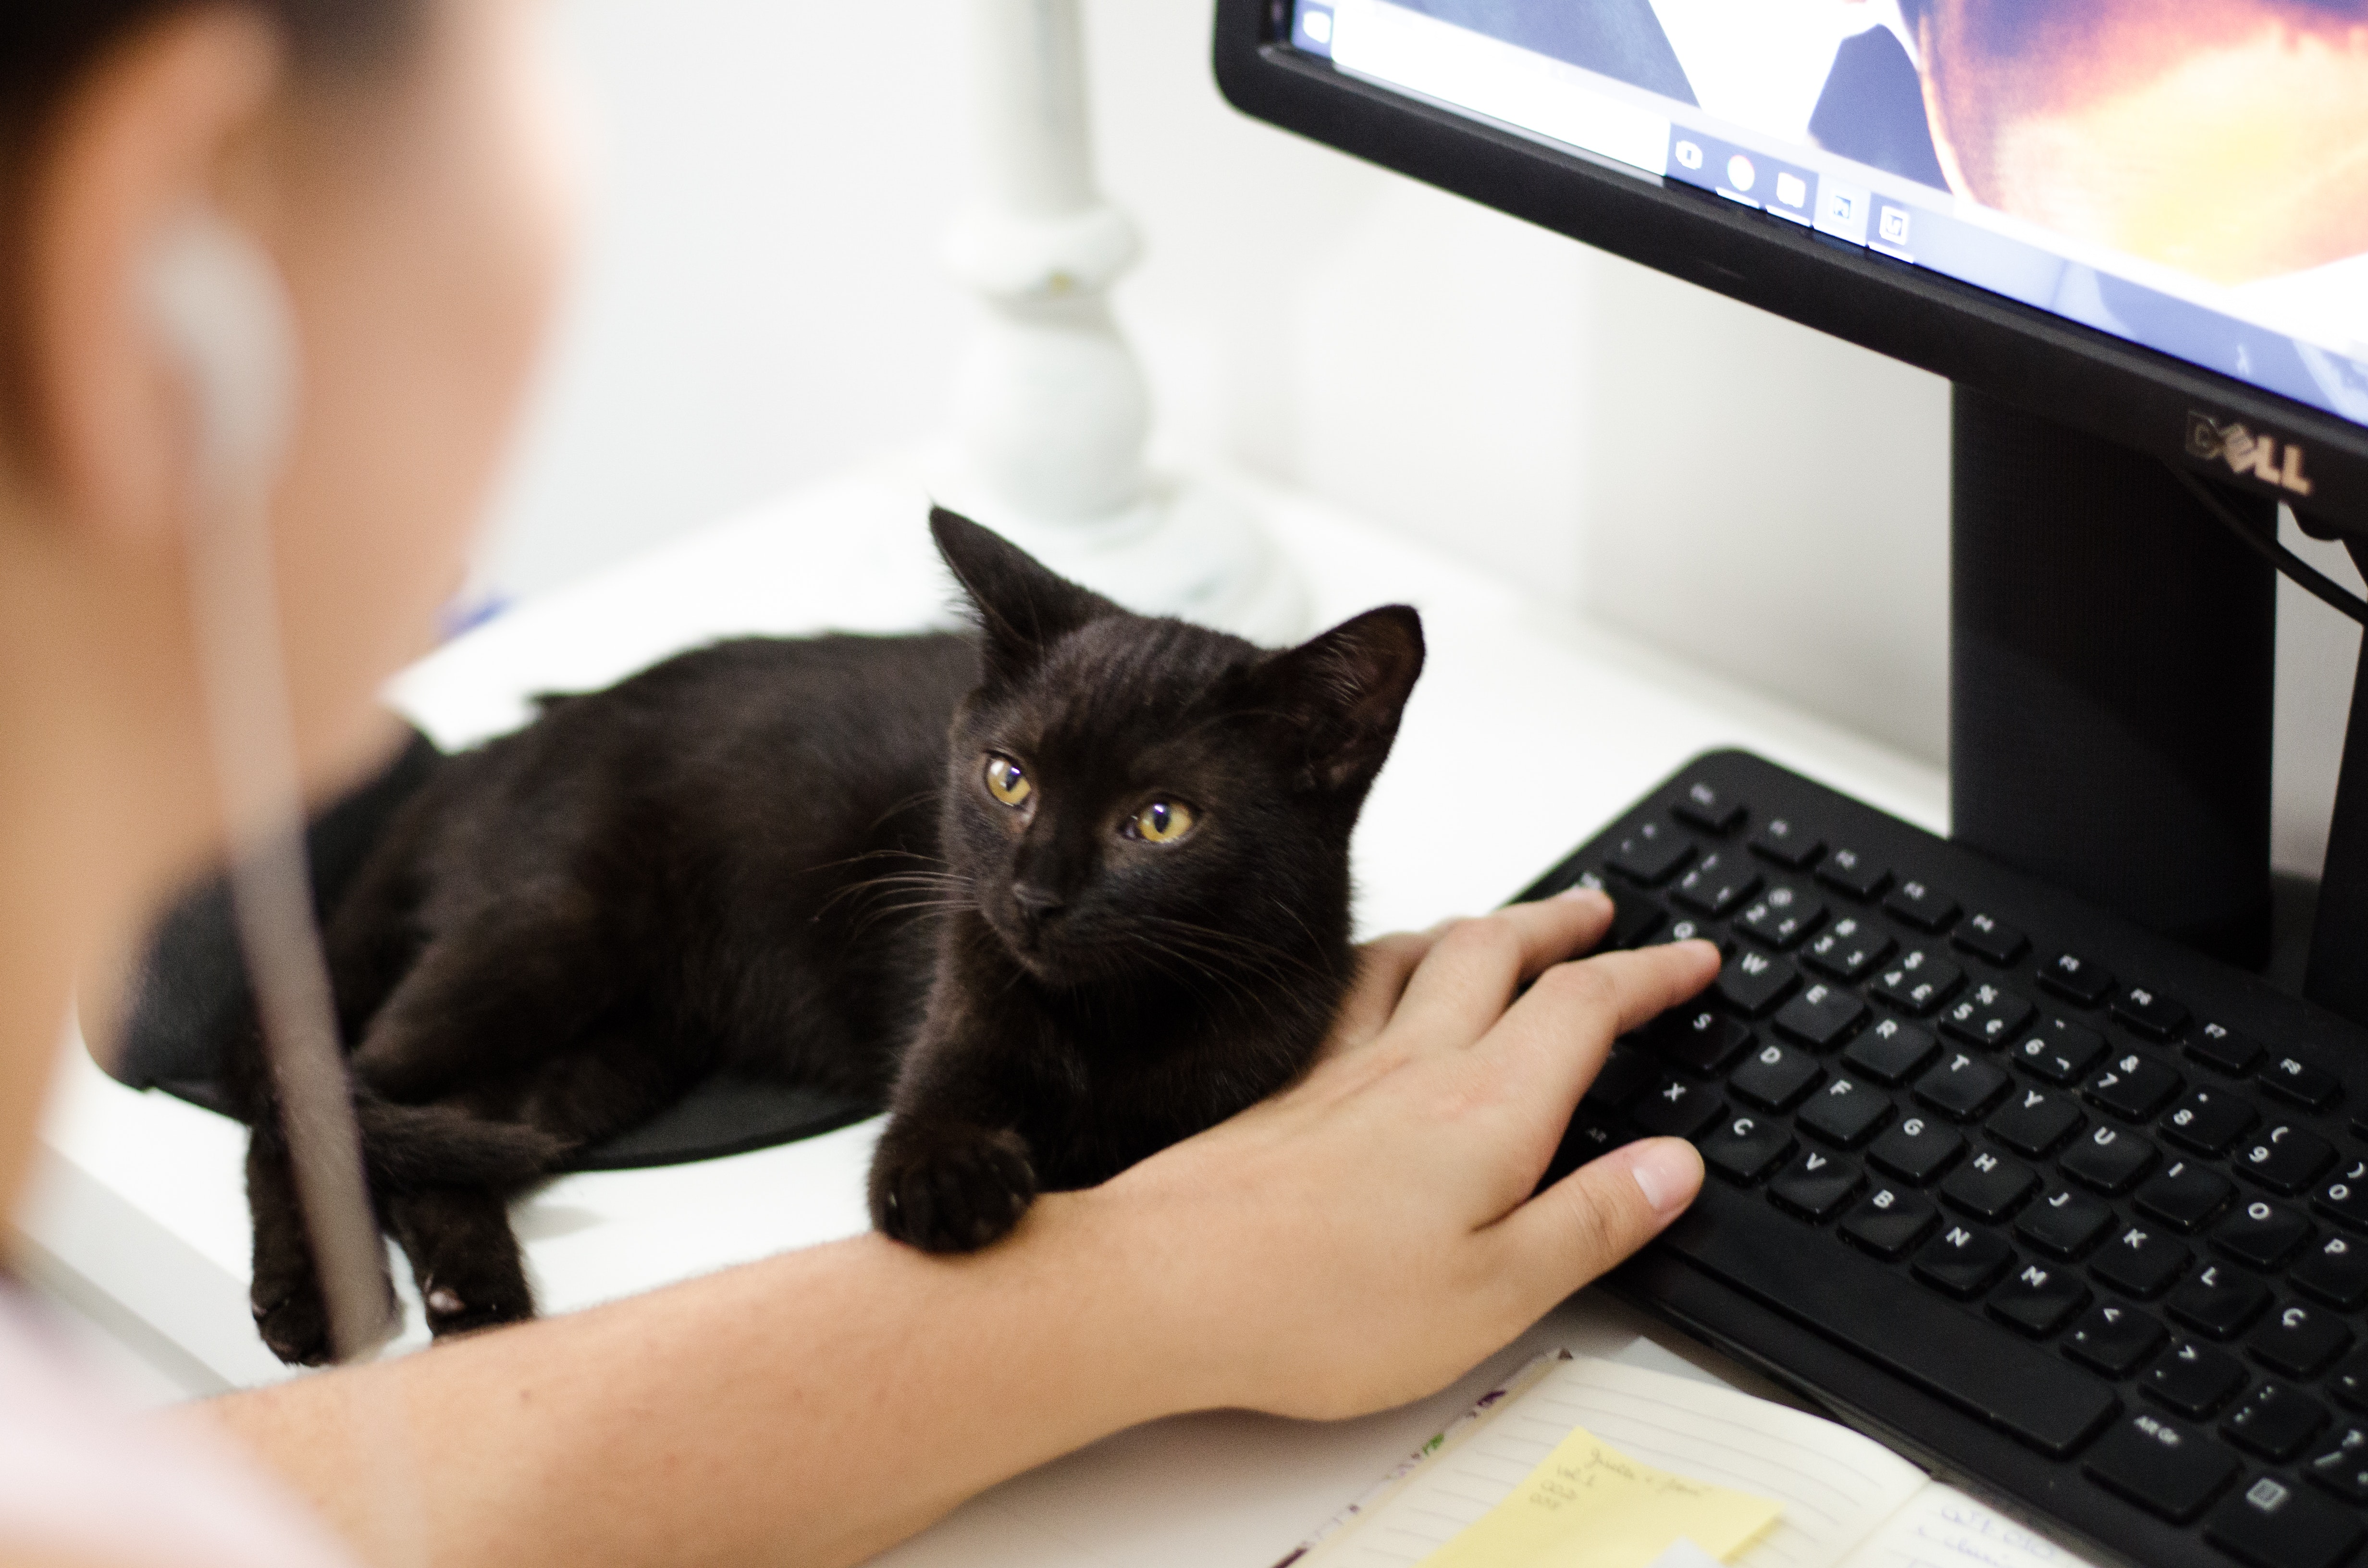 Picture of a person typing on a computer and a black kitten placing his the person's arm.